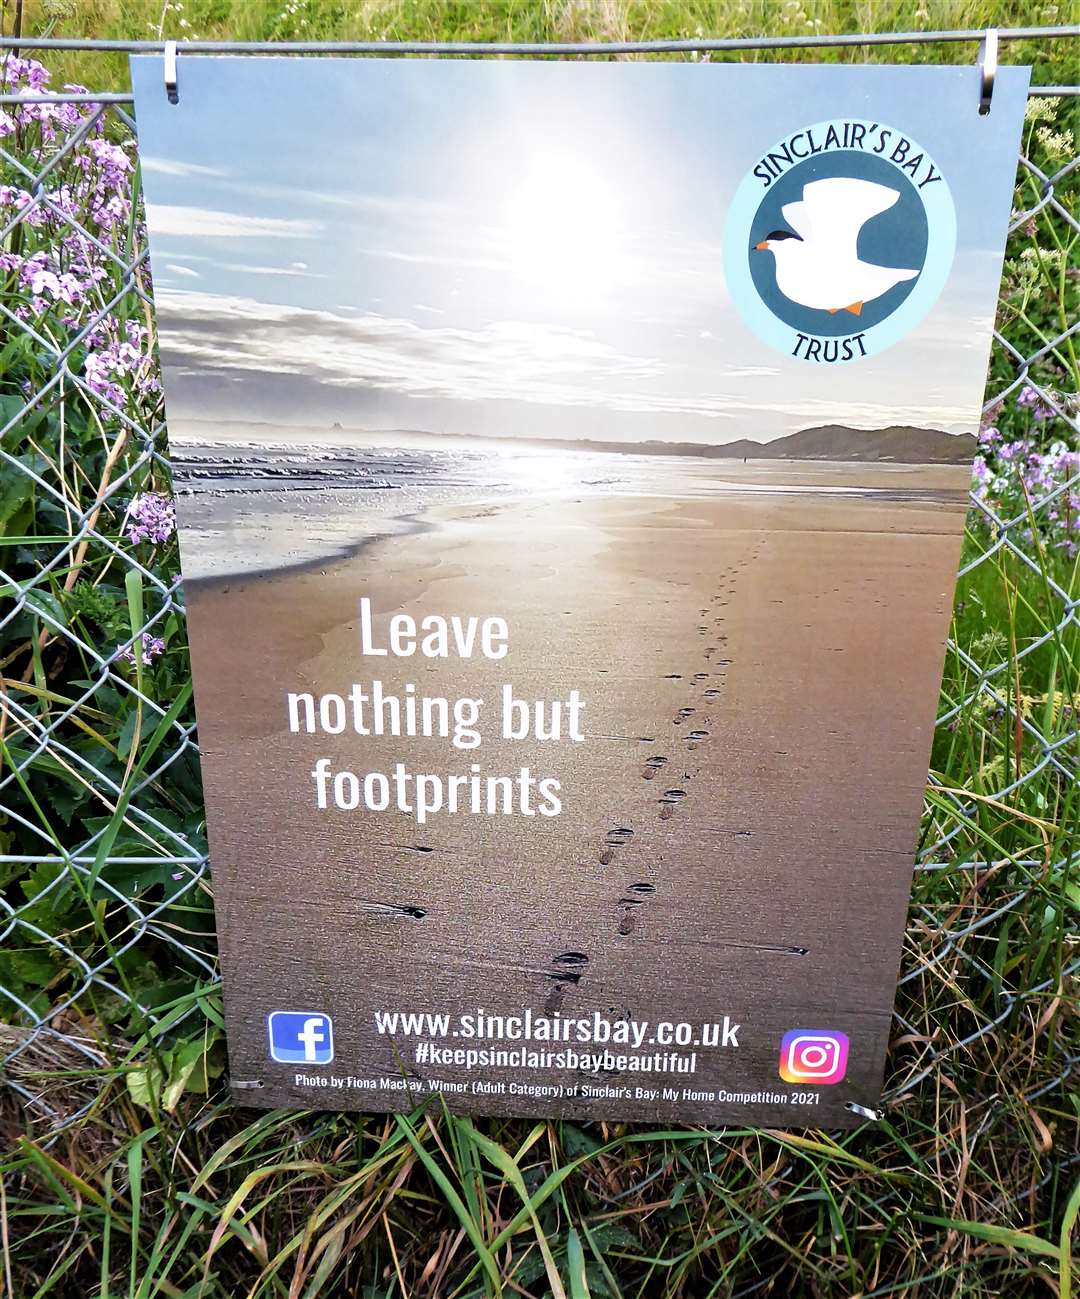 'Leave nothing but footprints' is the clear message for those visiting the beach at Reiss. The sign includes an image taken by local resident Fiona Mackay.